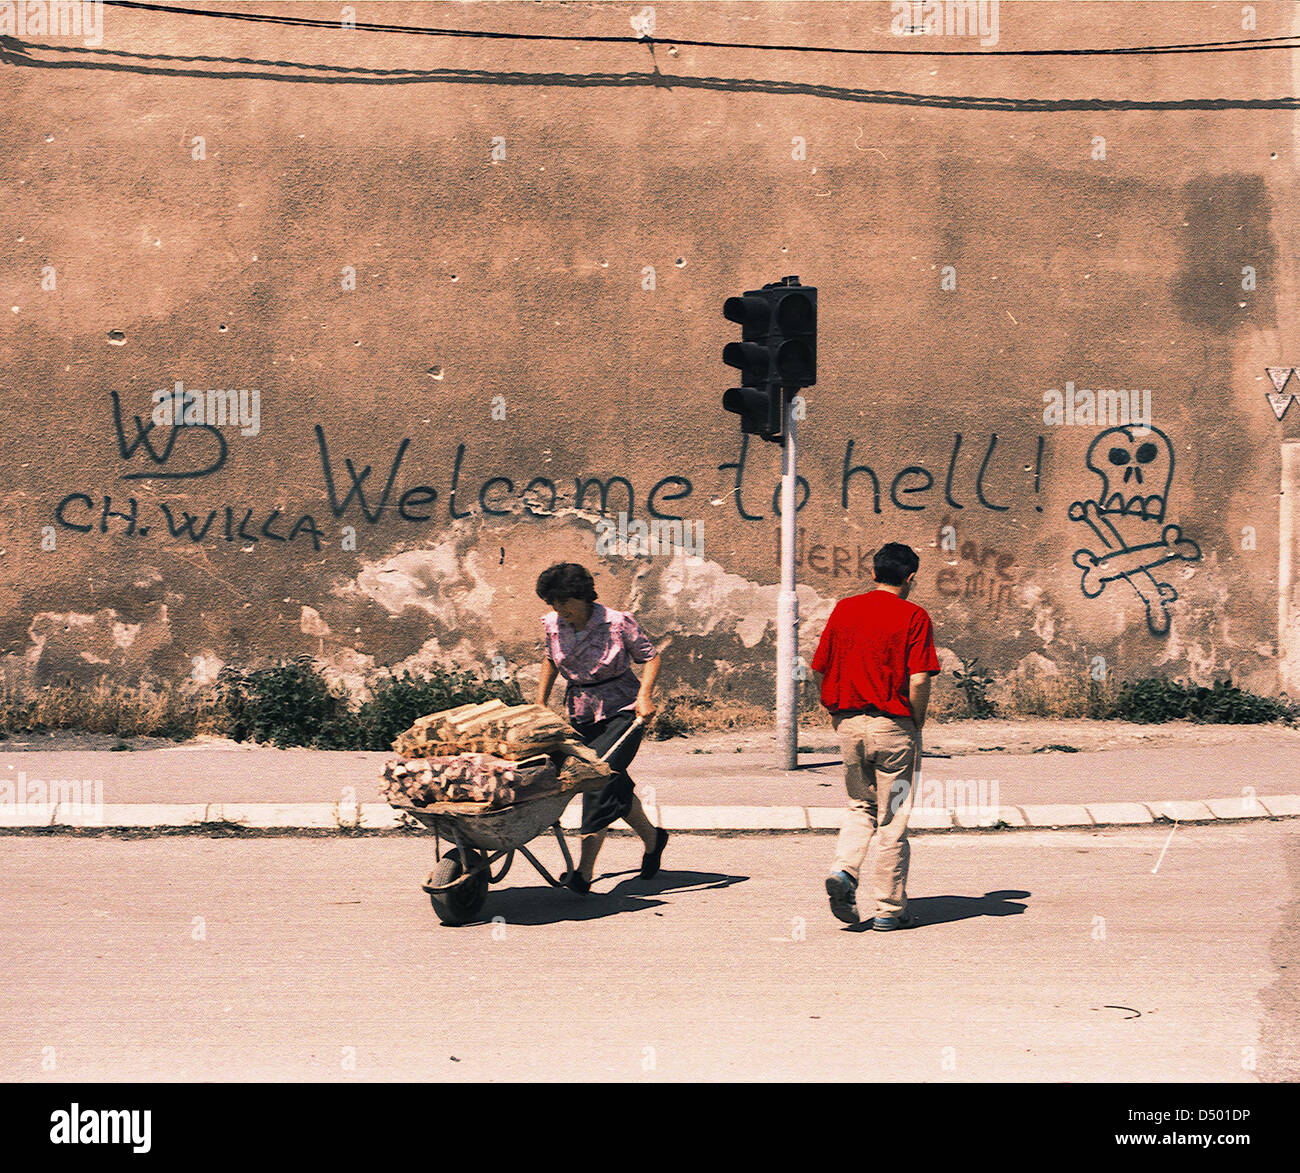 SARAJEVO, BOSNIA, 03 JULY 1993 ---- The famous 'welcome to hell' graffiti on a wall in Sarajevo. Stock Photo